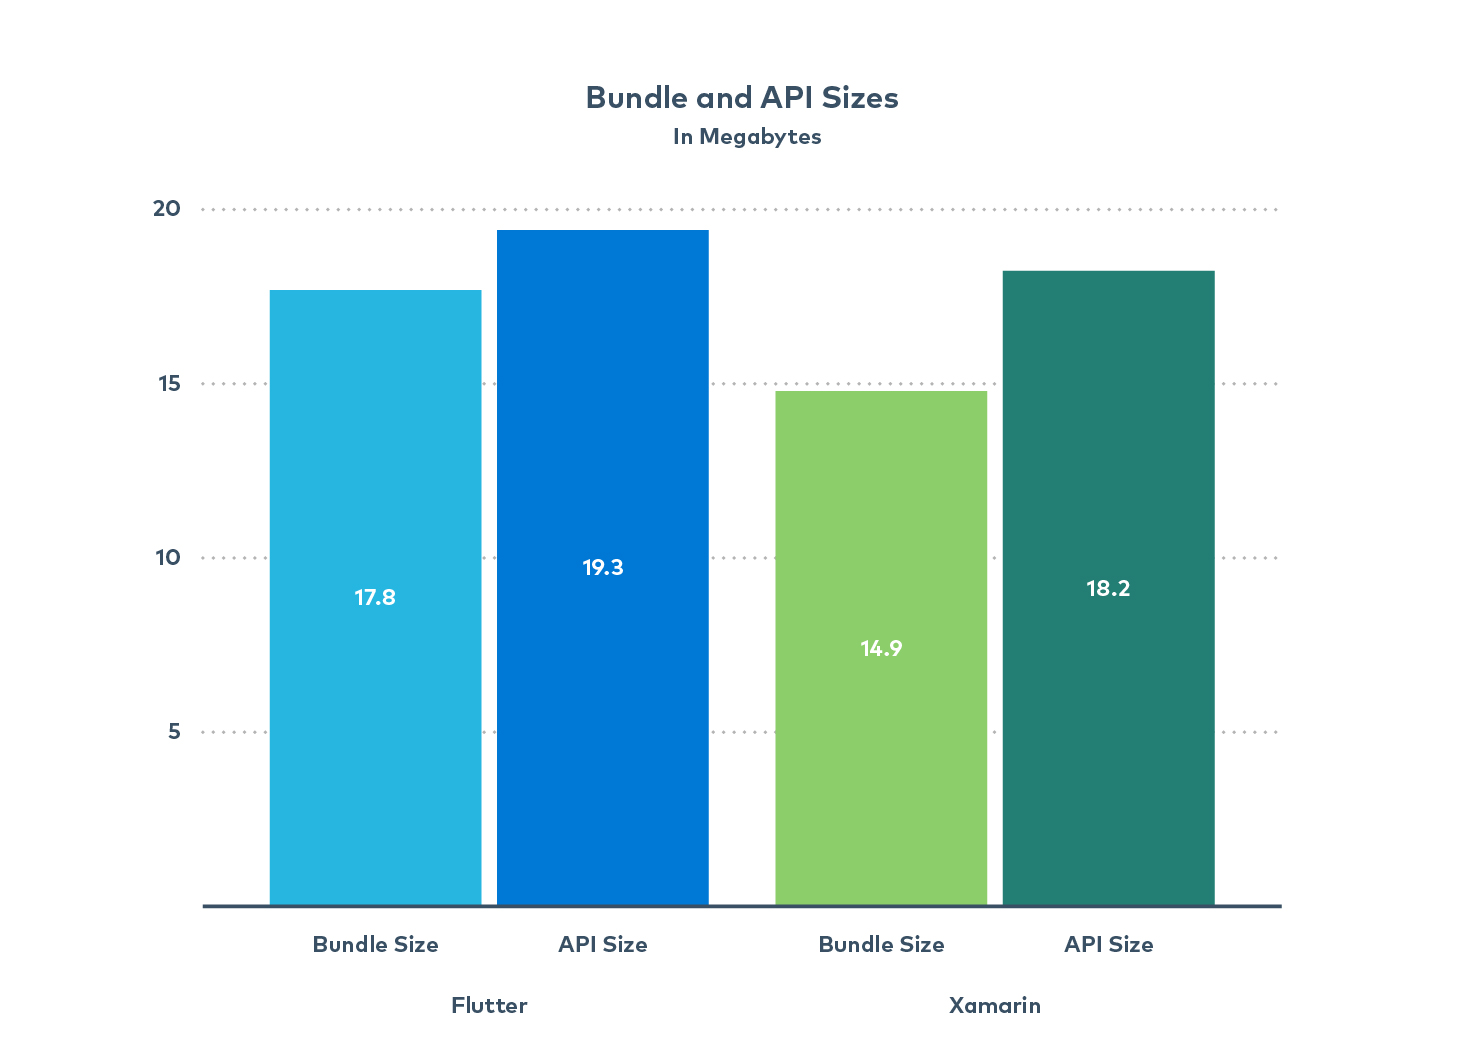 Graphic of a bar chart comparing “Flutter” and “Xamarin” based on “Bundle Size” and “API Size”. The title of the graph reads “Bundle and API Sizes in Megabytes”.